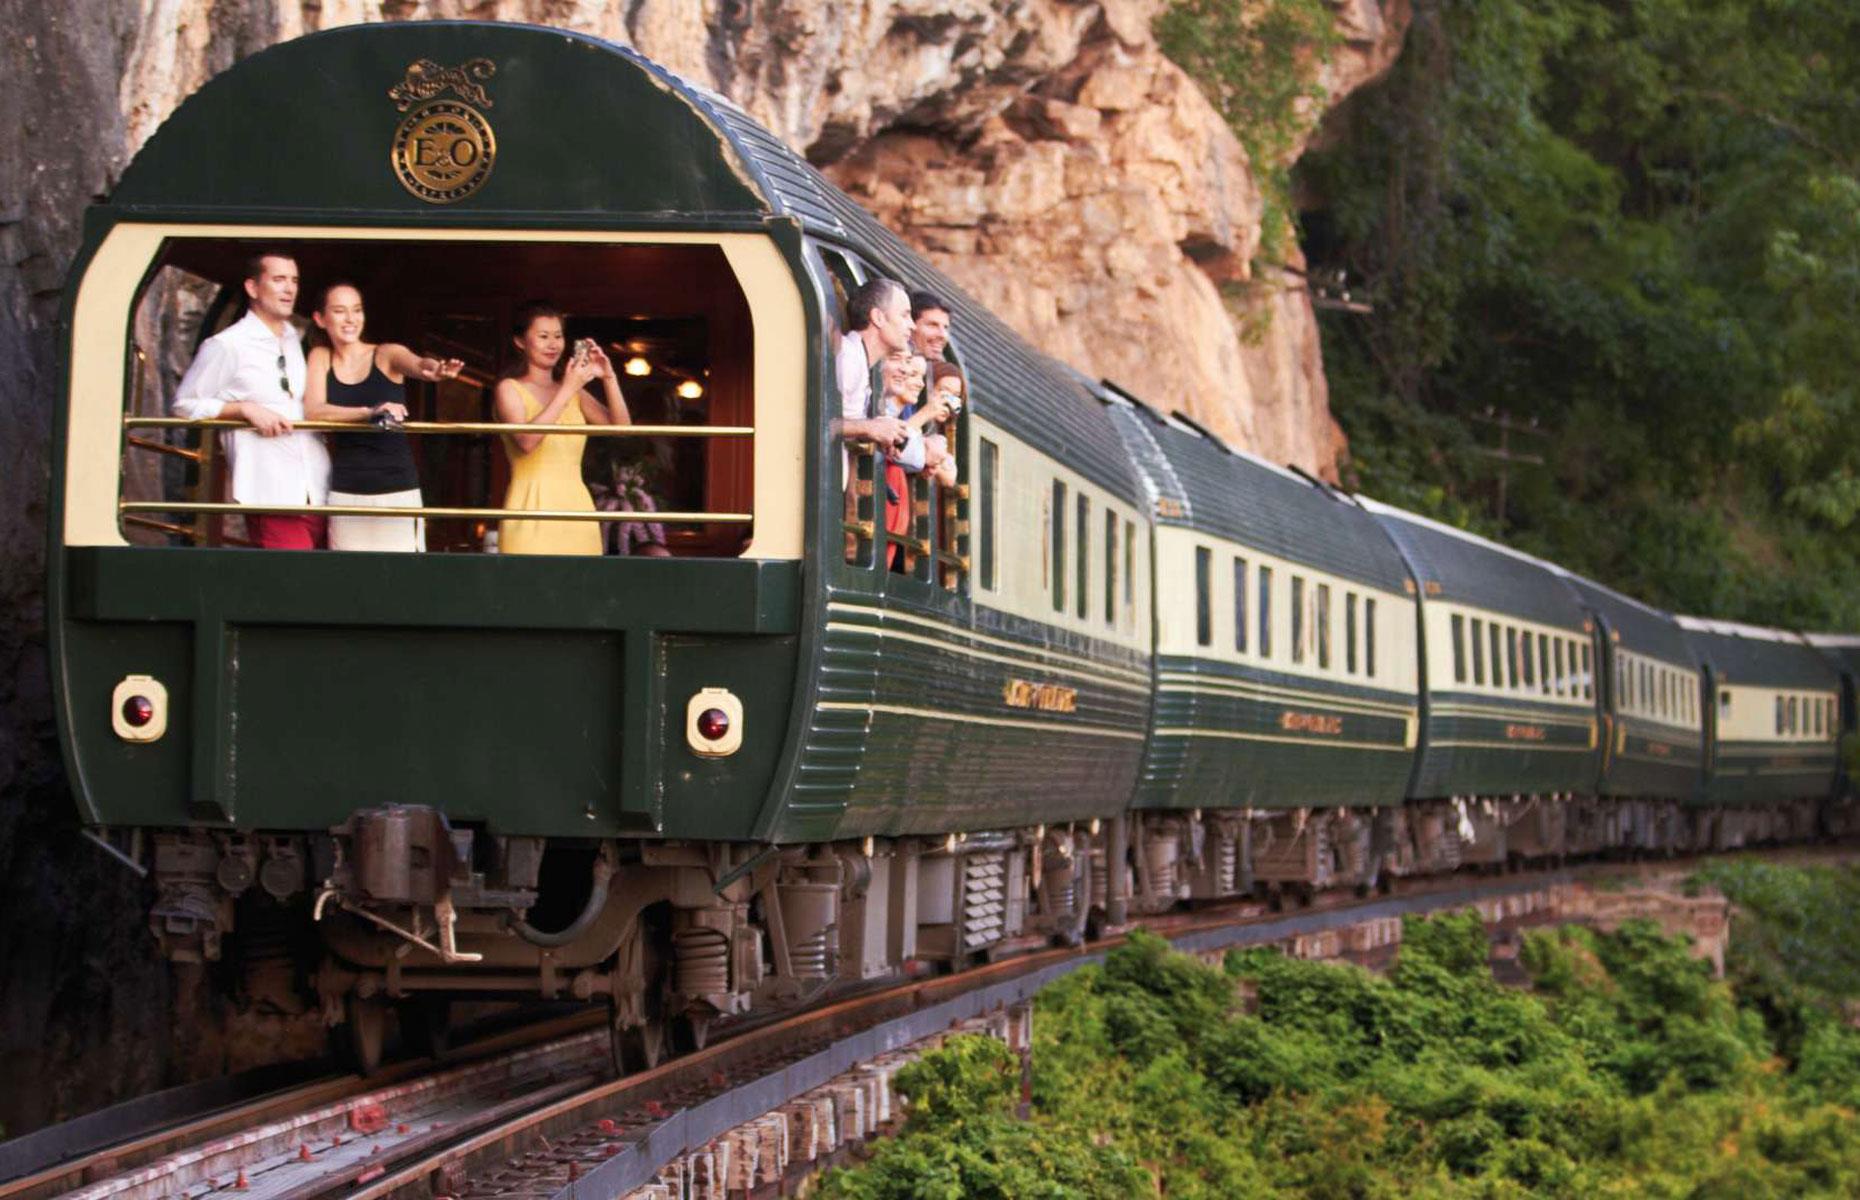 The wonderfully exotic Eastern & Oriental Express, Asia's most opulent train, now belongs to the French billionaire as well. Travelling between Thailand, Malaysia and Singapore, the train delights with cherrywood panelling and delicate Thai silk upholstery, not to mention an amazing open-decked observation carriage.